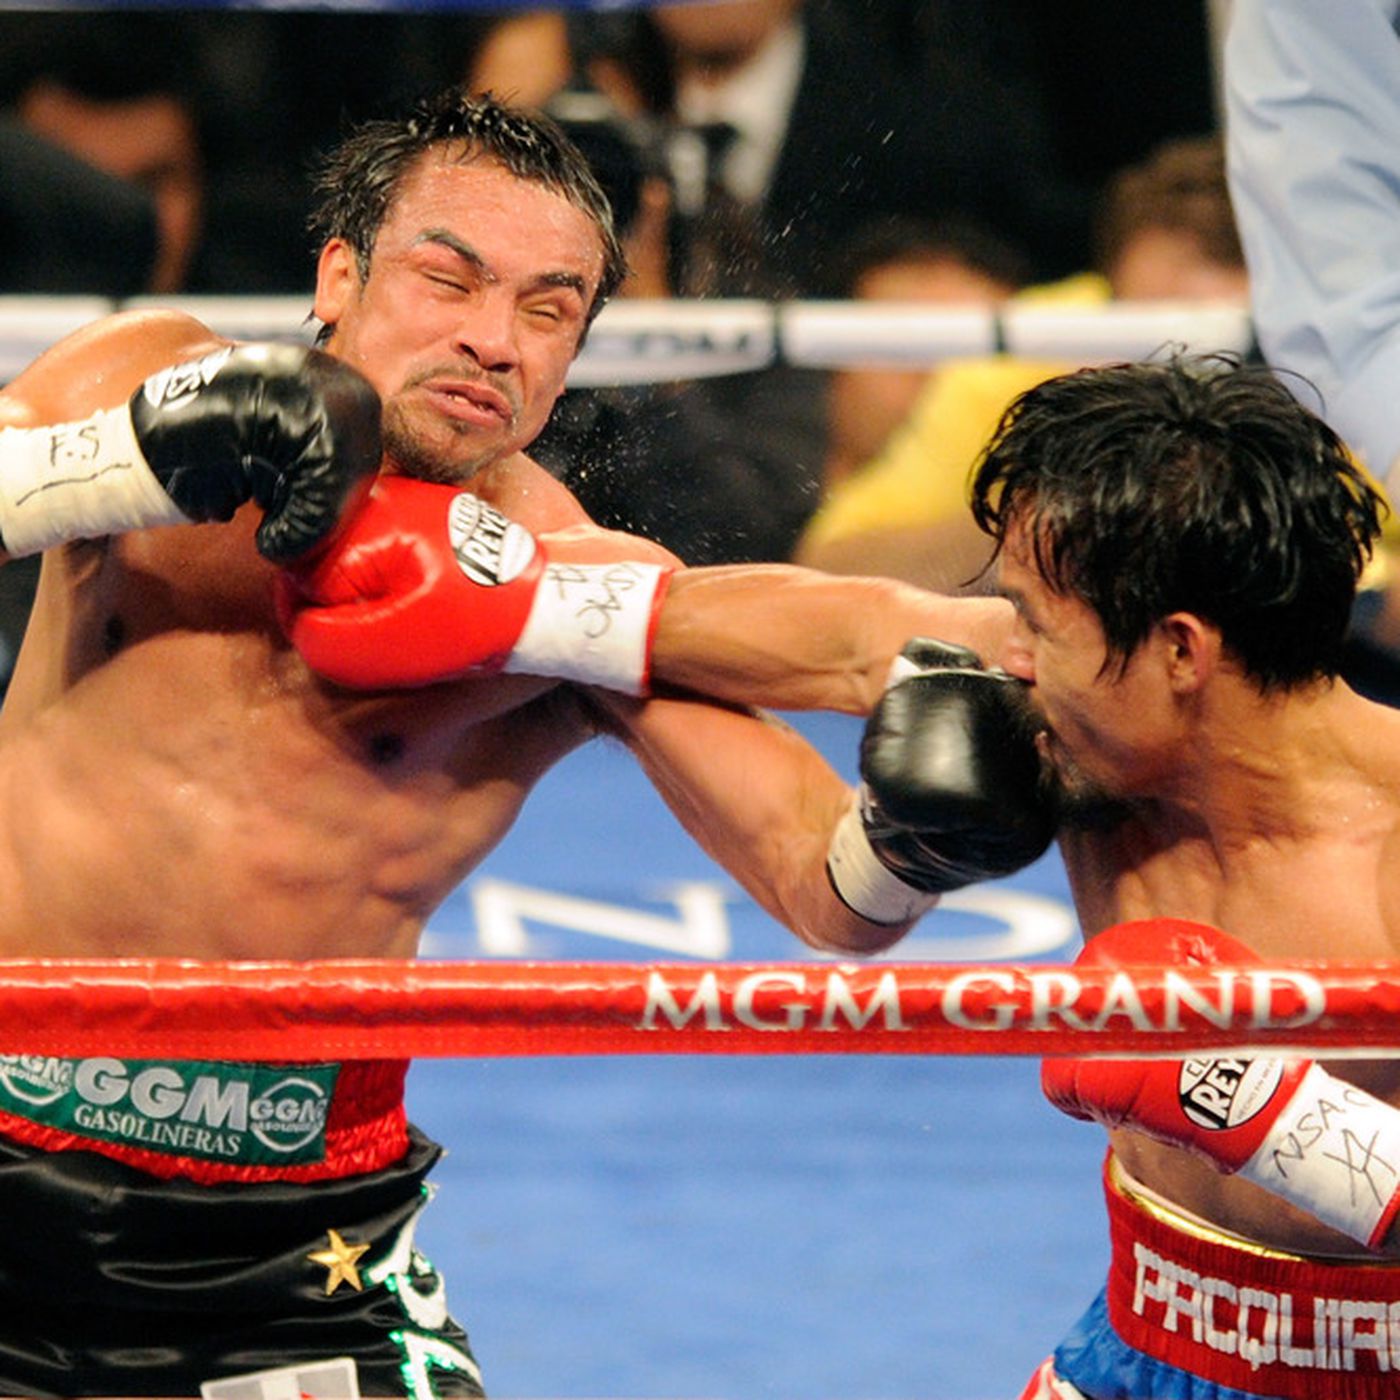 pacquiao vs marquez 4 betting odds